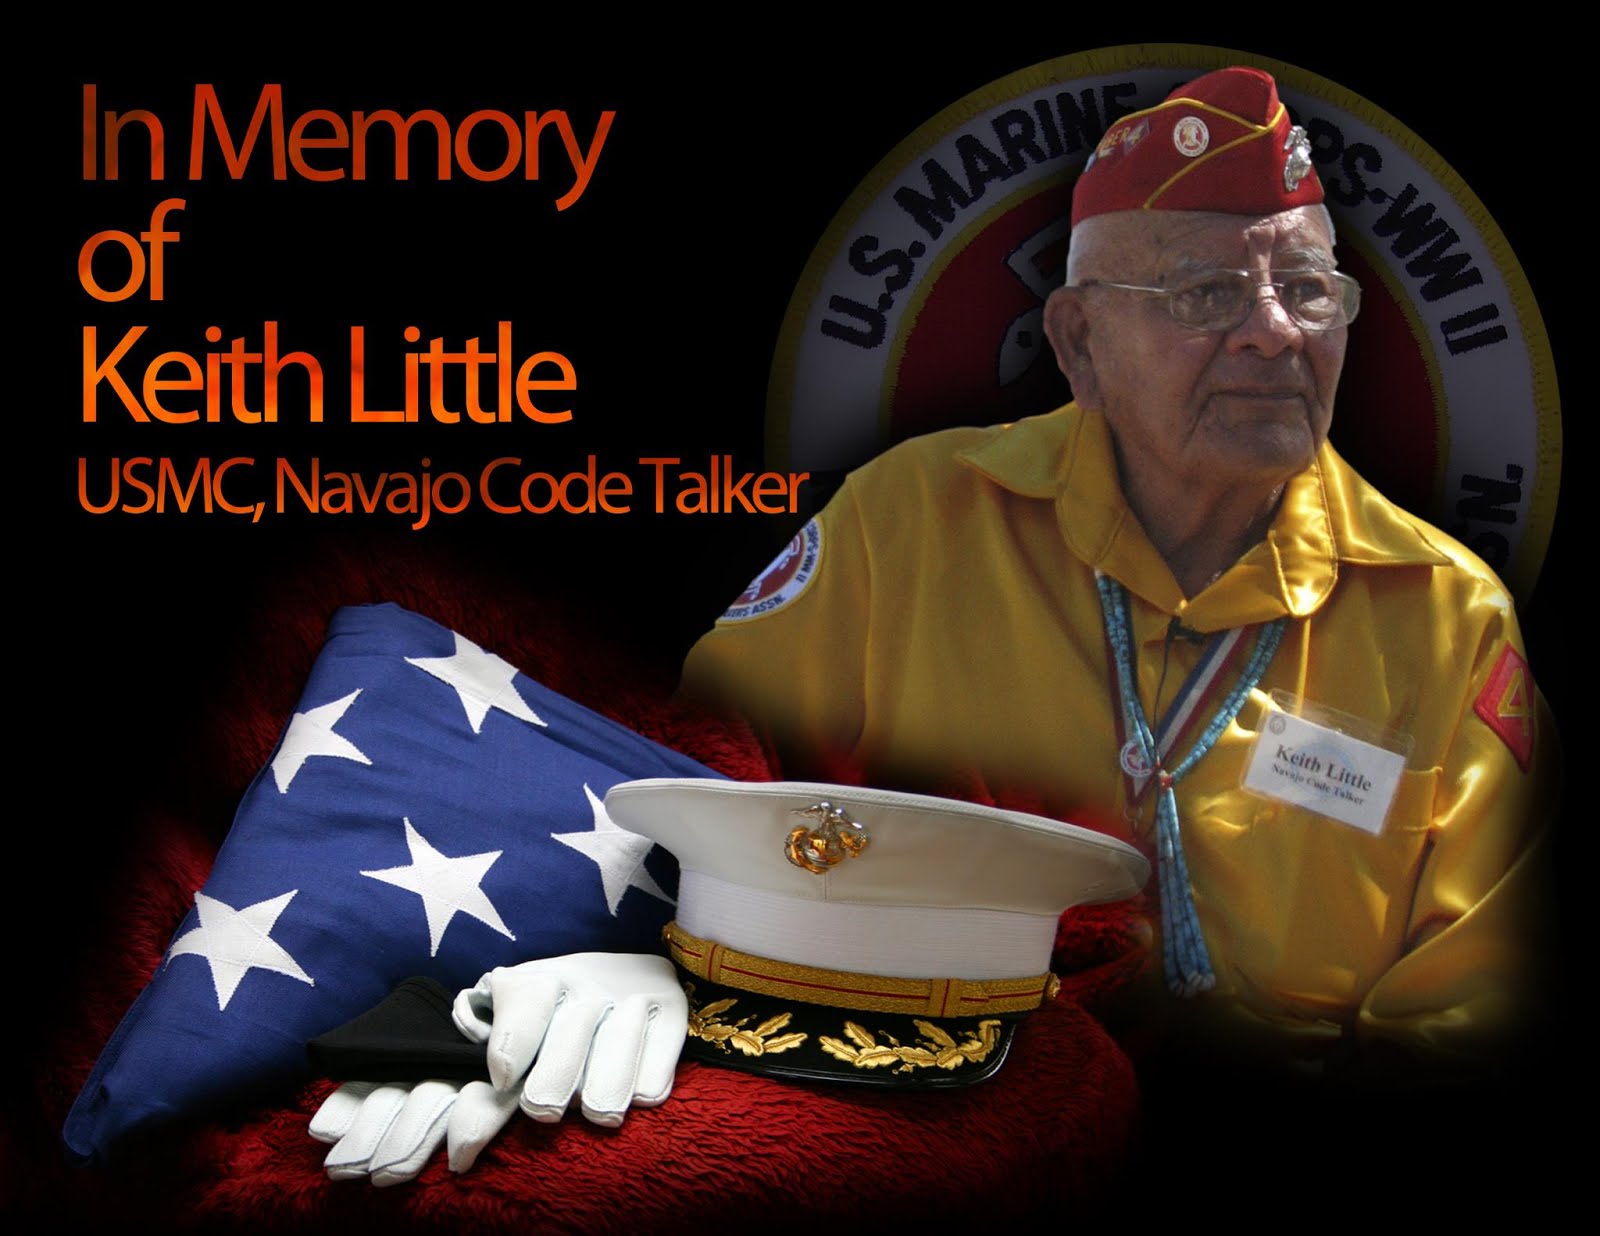 IN MEMORY OF KEITH LITTLE